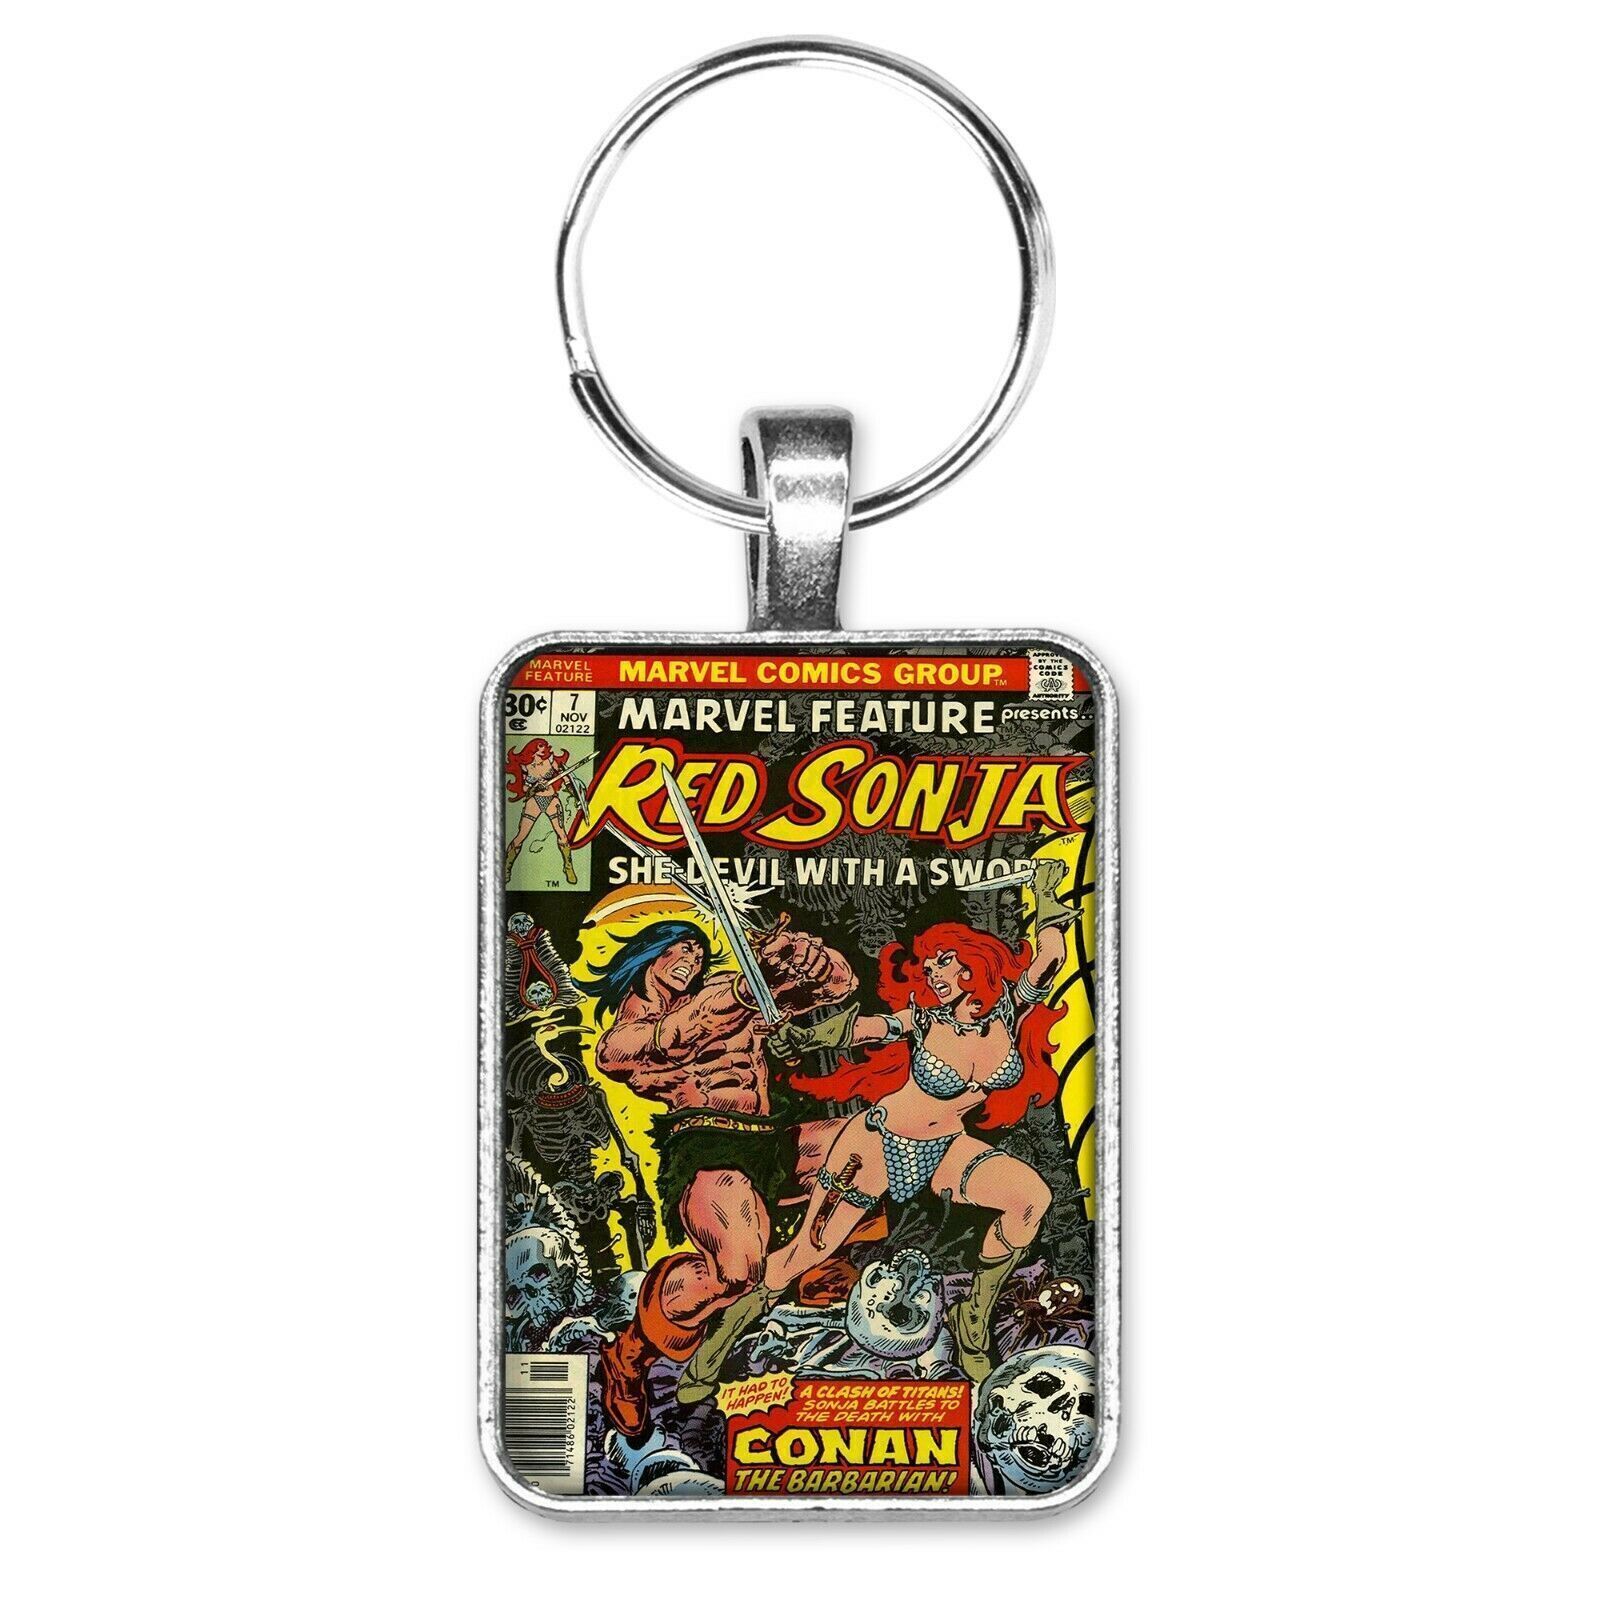 Marvel Feature Red Sonja She-Devil with a Sword #7 Cover Key Ring or Necklace